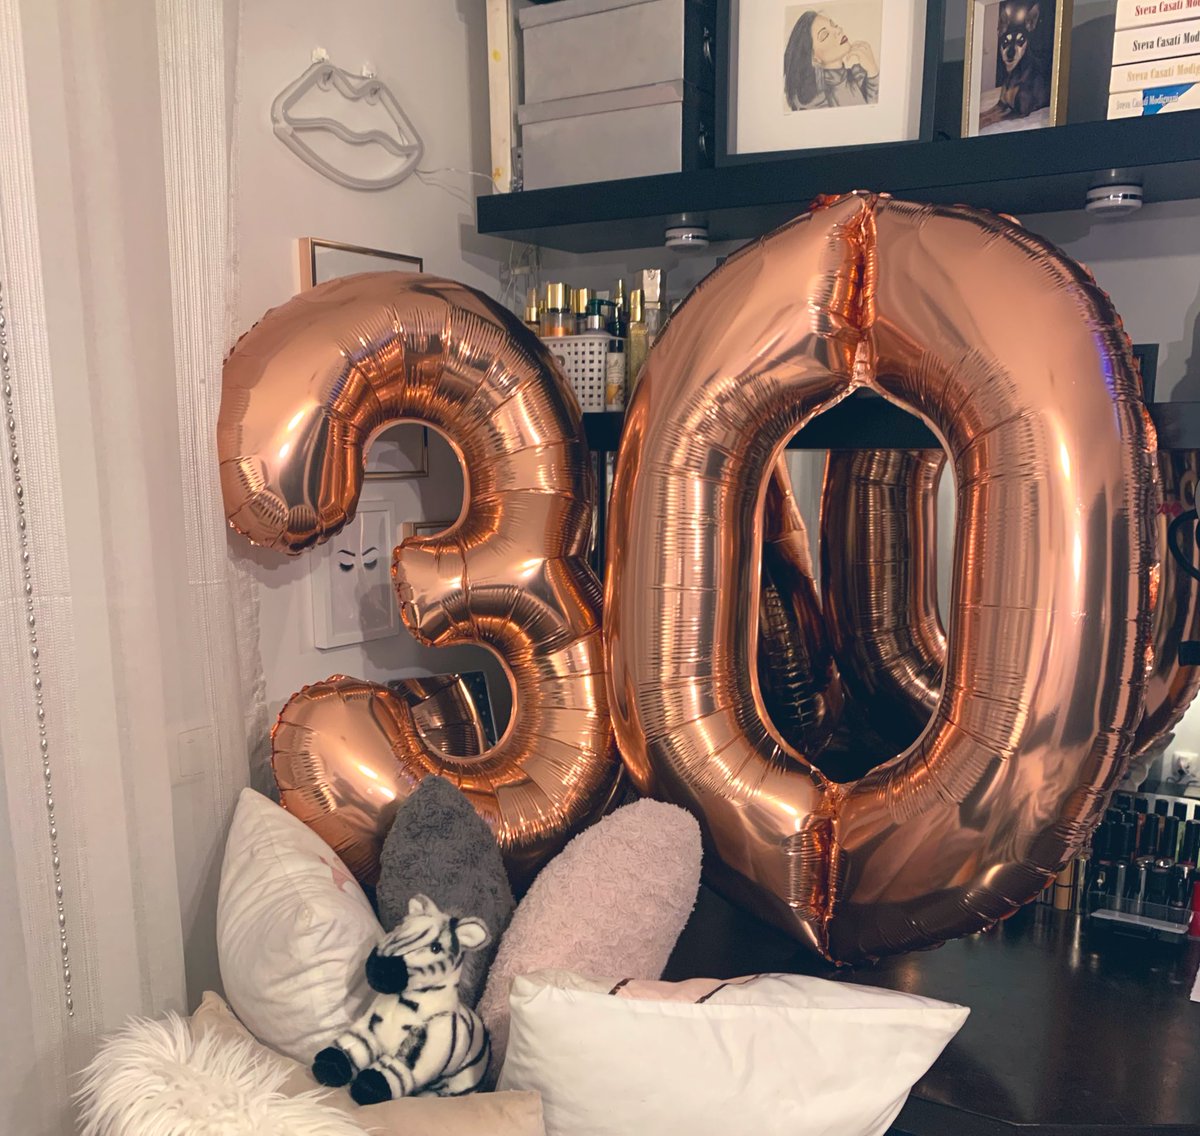 It’s my birthday 🥳🎂🎊🎁🎈
#30yearsold #march3 #bday